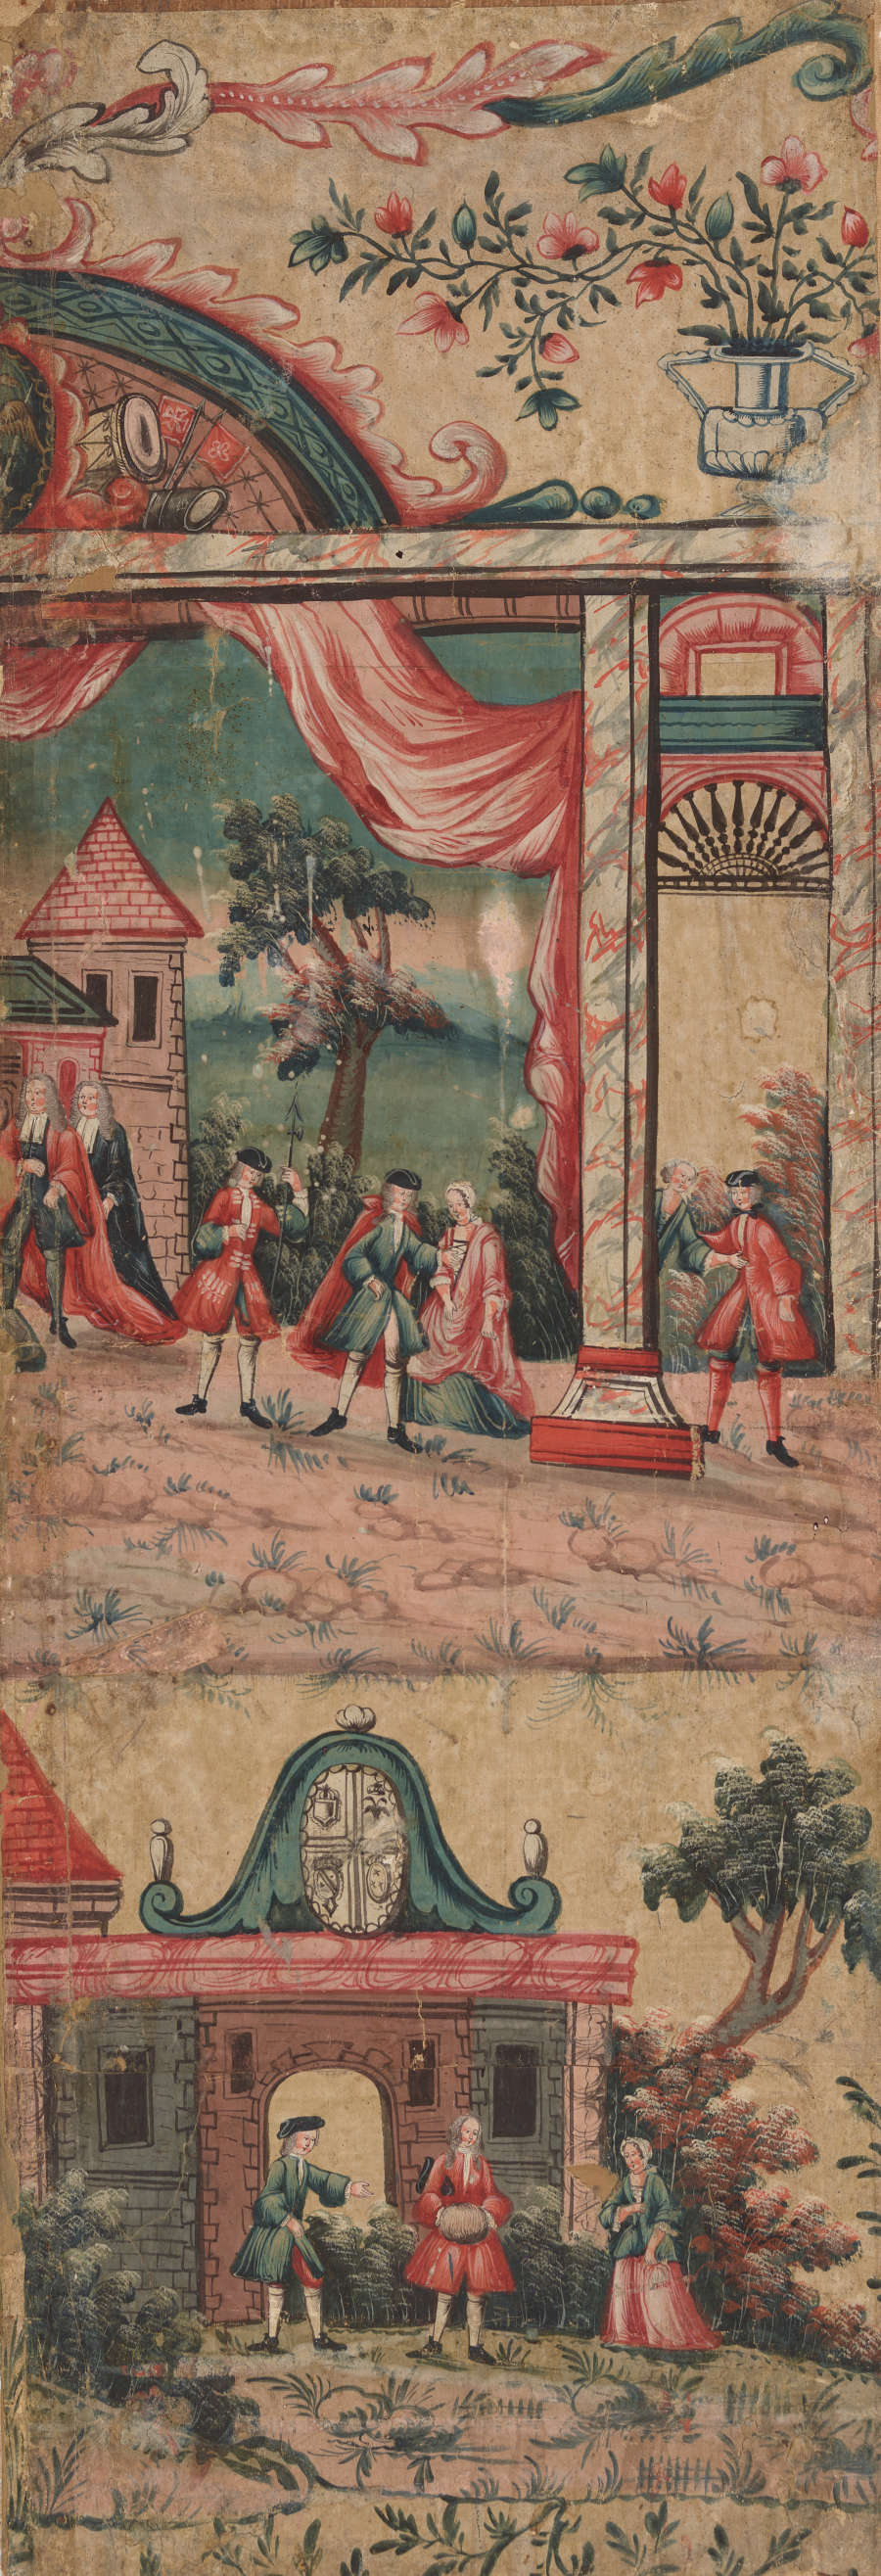 Segment of dated vintage wallpaper depicting scenes of nobility, with figures in elaborate period attire engaging in dialogue and leisure activities set in ornate architectural settings.